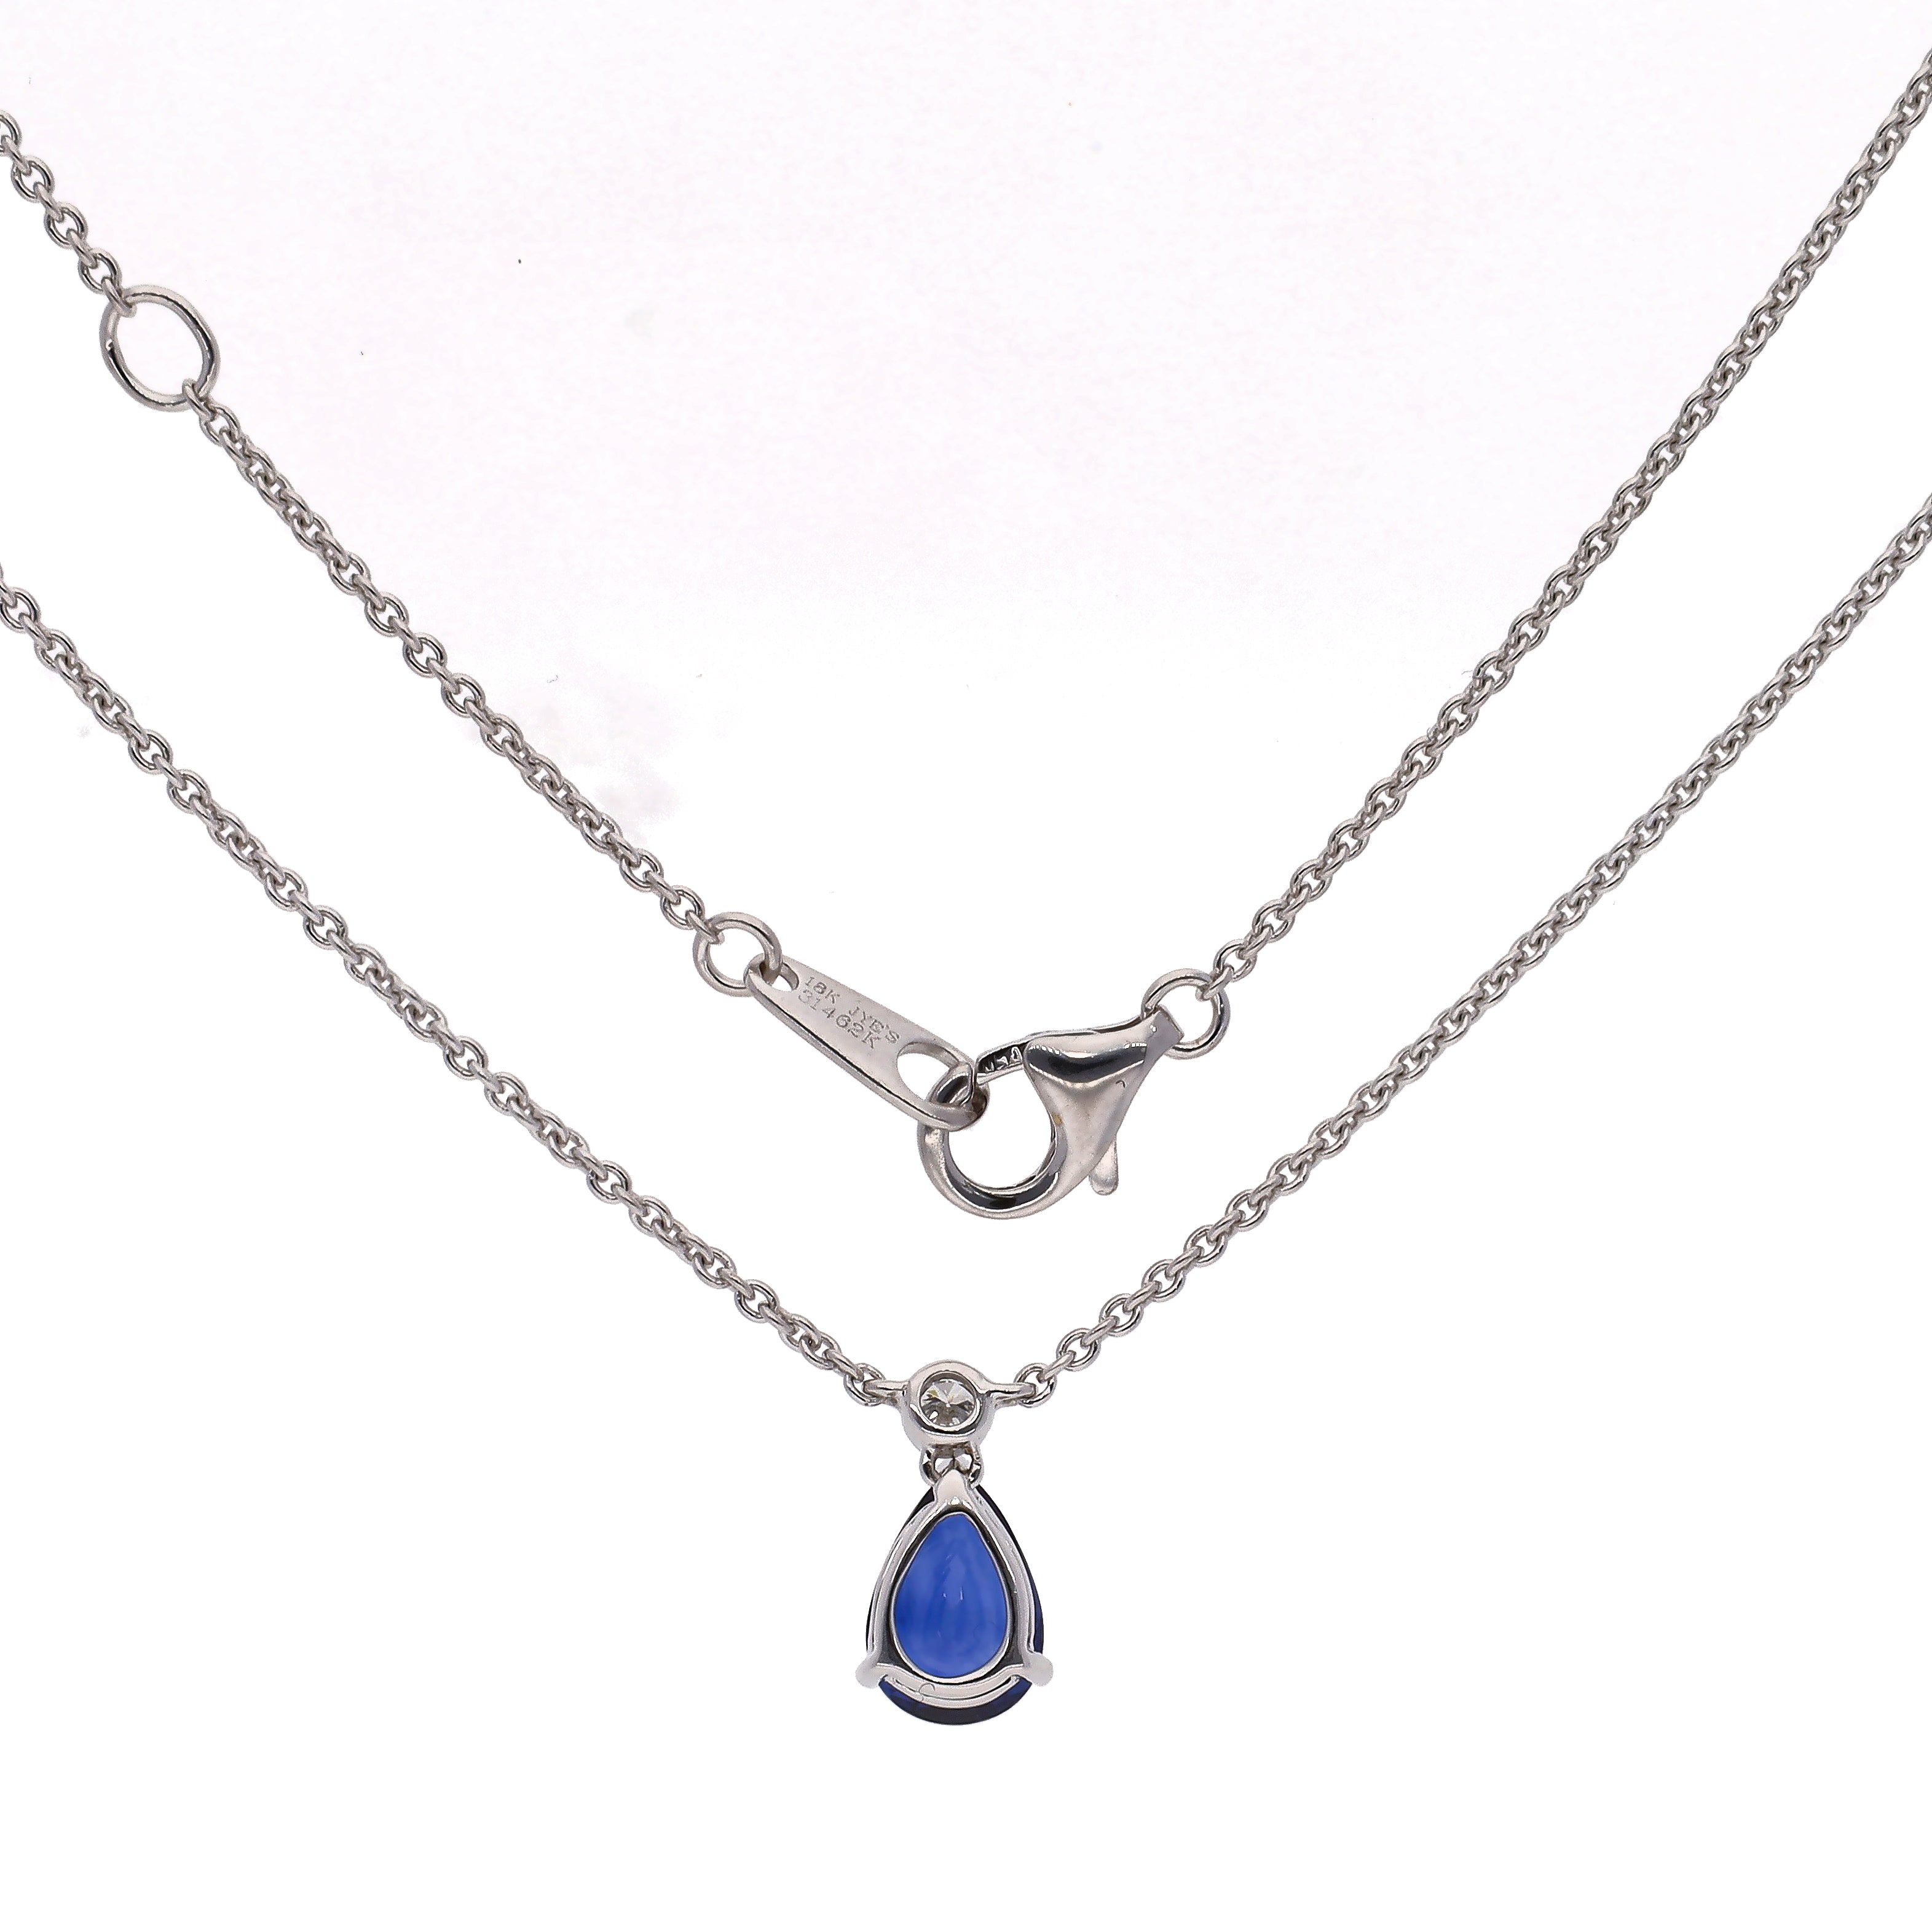 18K White Gold Pear Shaped Sapphire and Diamond Pendant 16" Necklace